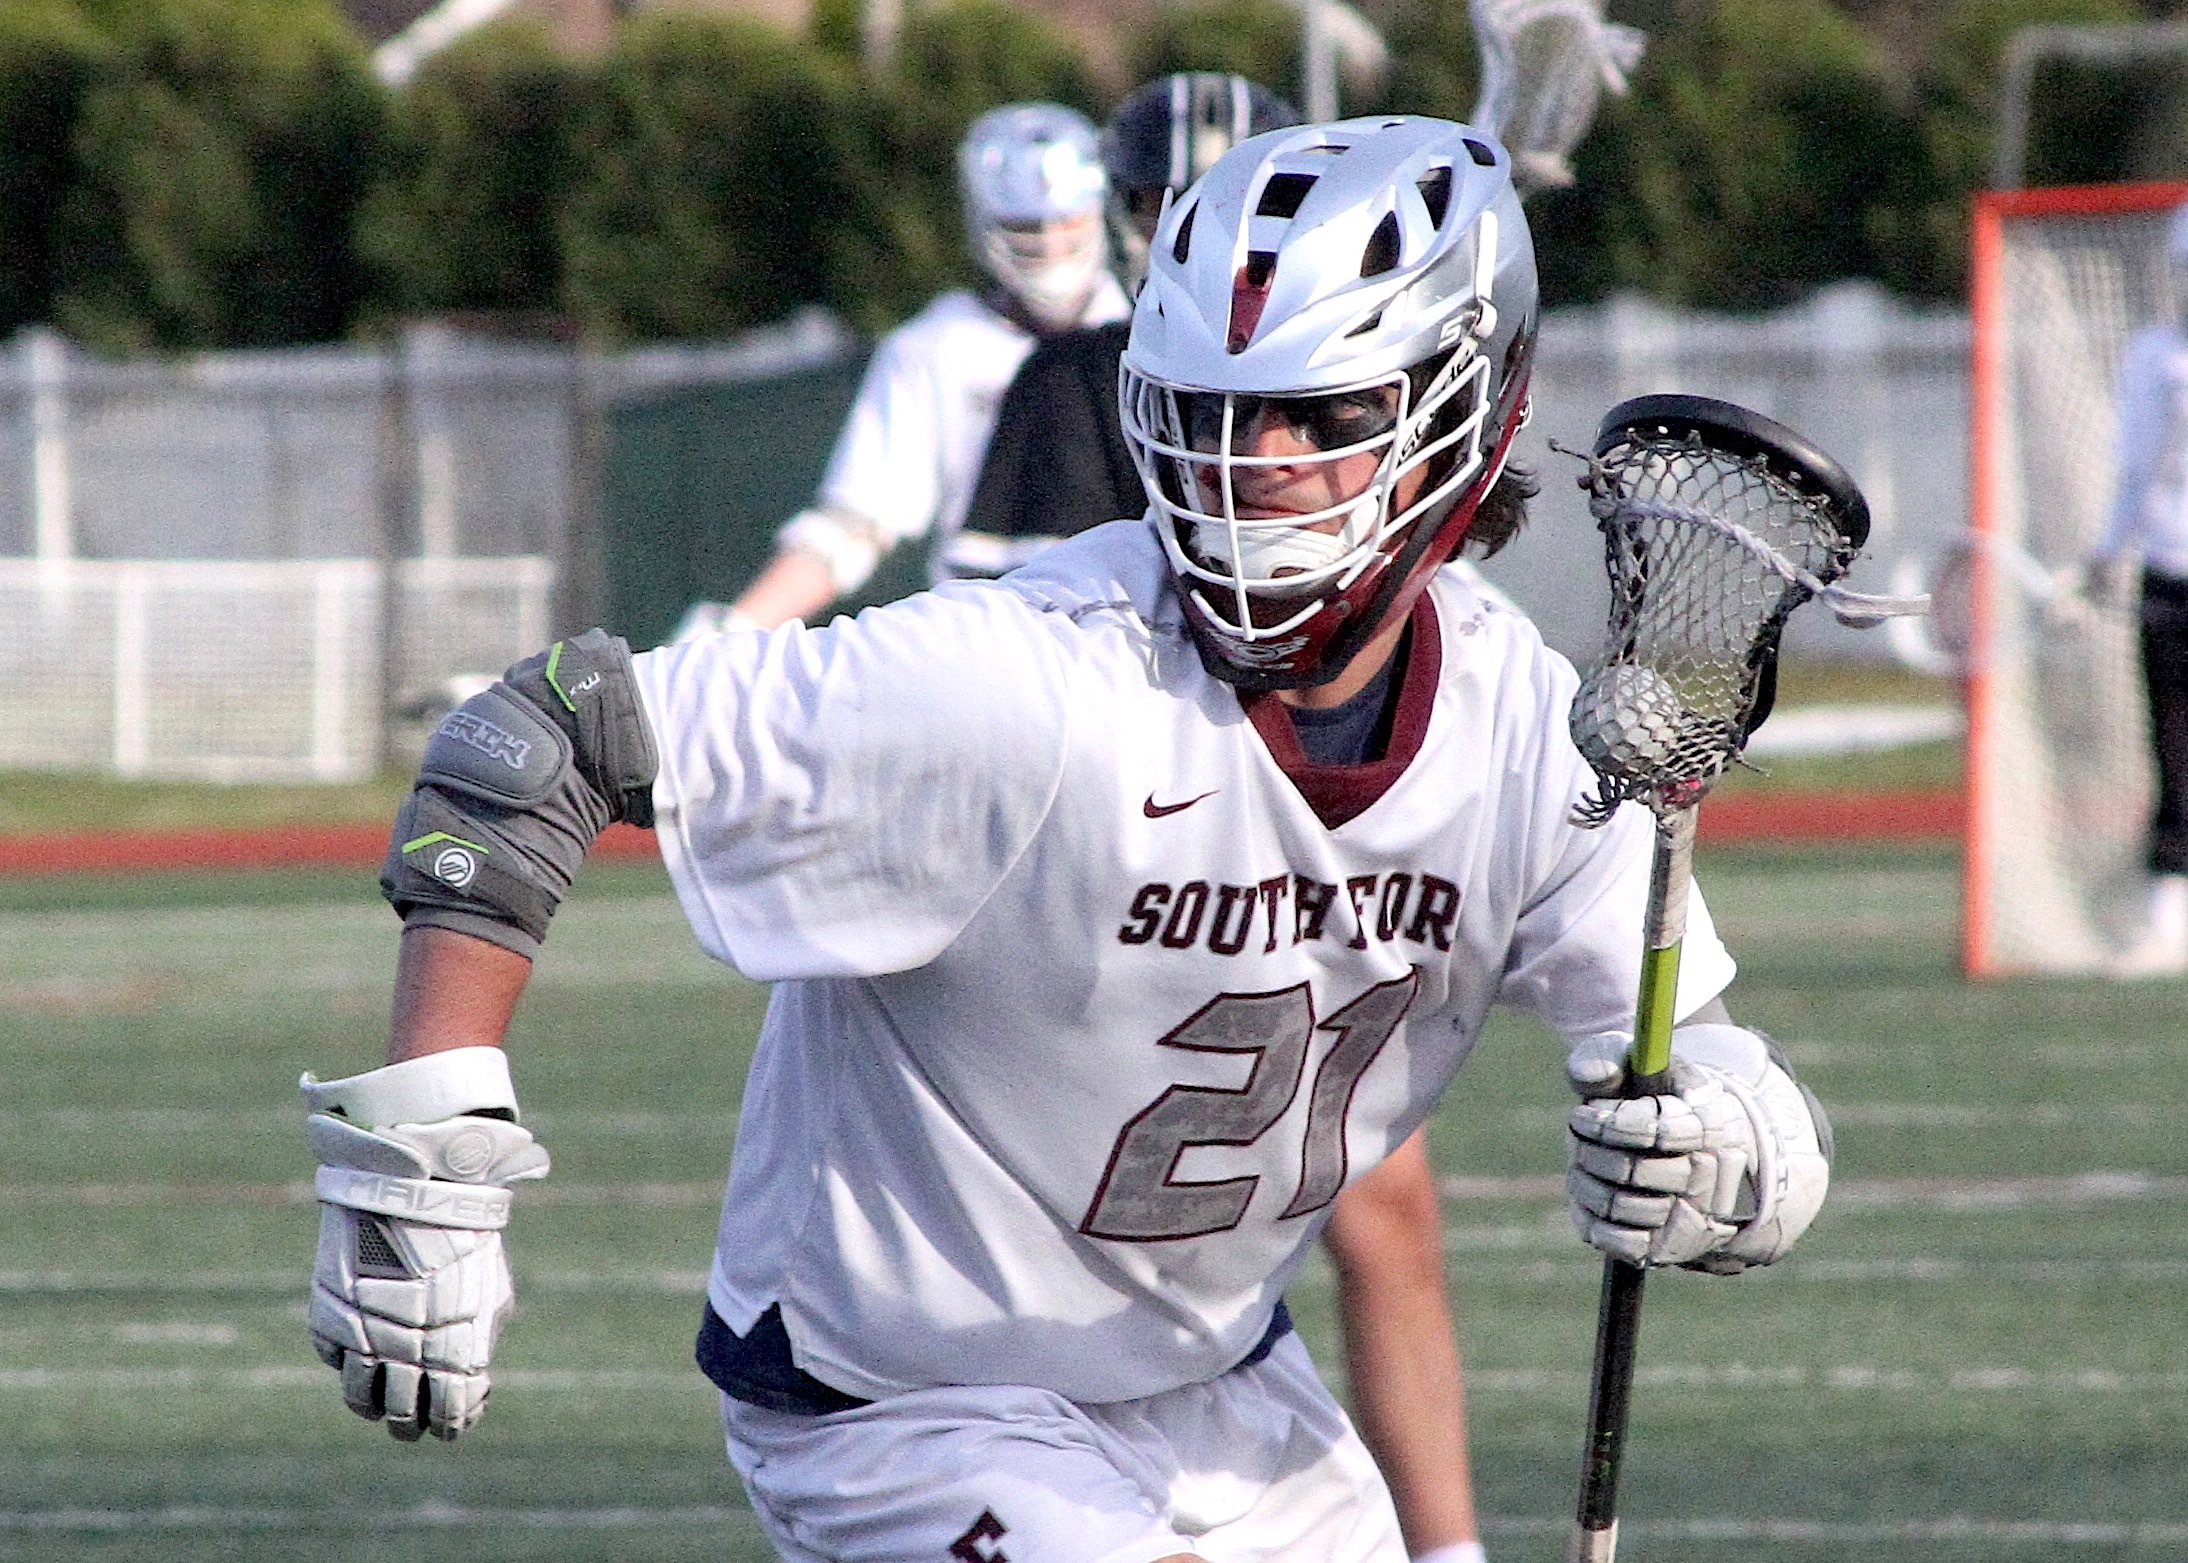 Sophomore midfielder Jack Cooper won all but three faceoffs for the South Fork boys lacrosse team in an 11-7 loss to Sachem North April 25. DESIRÉE KEEGAN